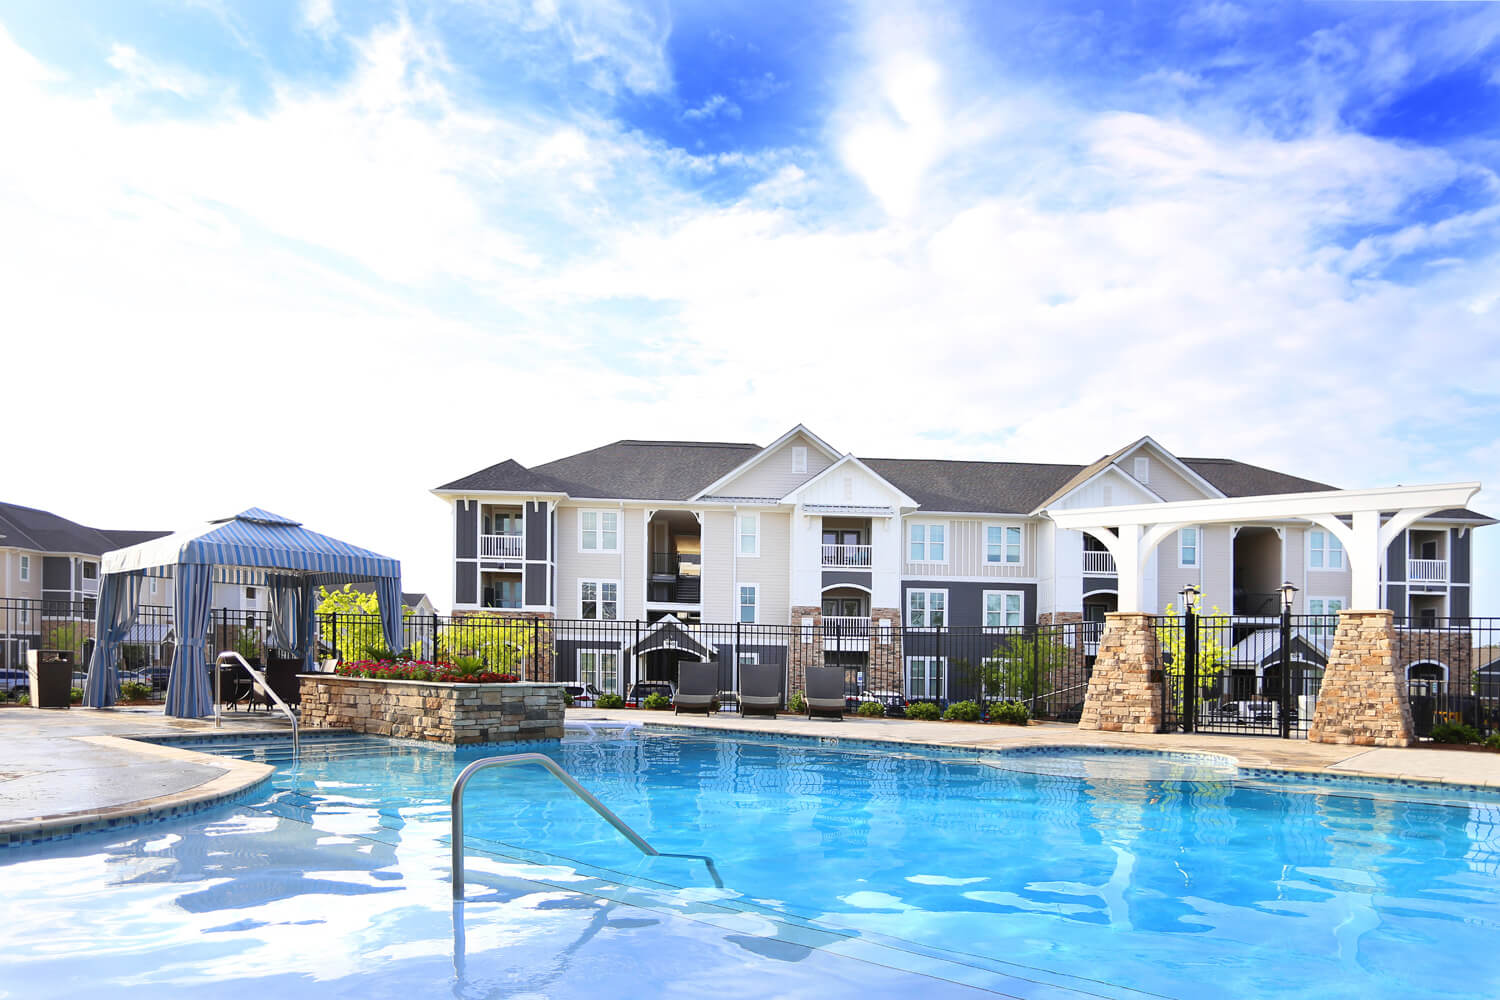 The Morgan Apartments Clubhouse Designed by Foshee Architecture - View of Pool Looking Towards the Apartment Buildings